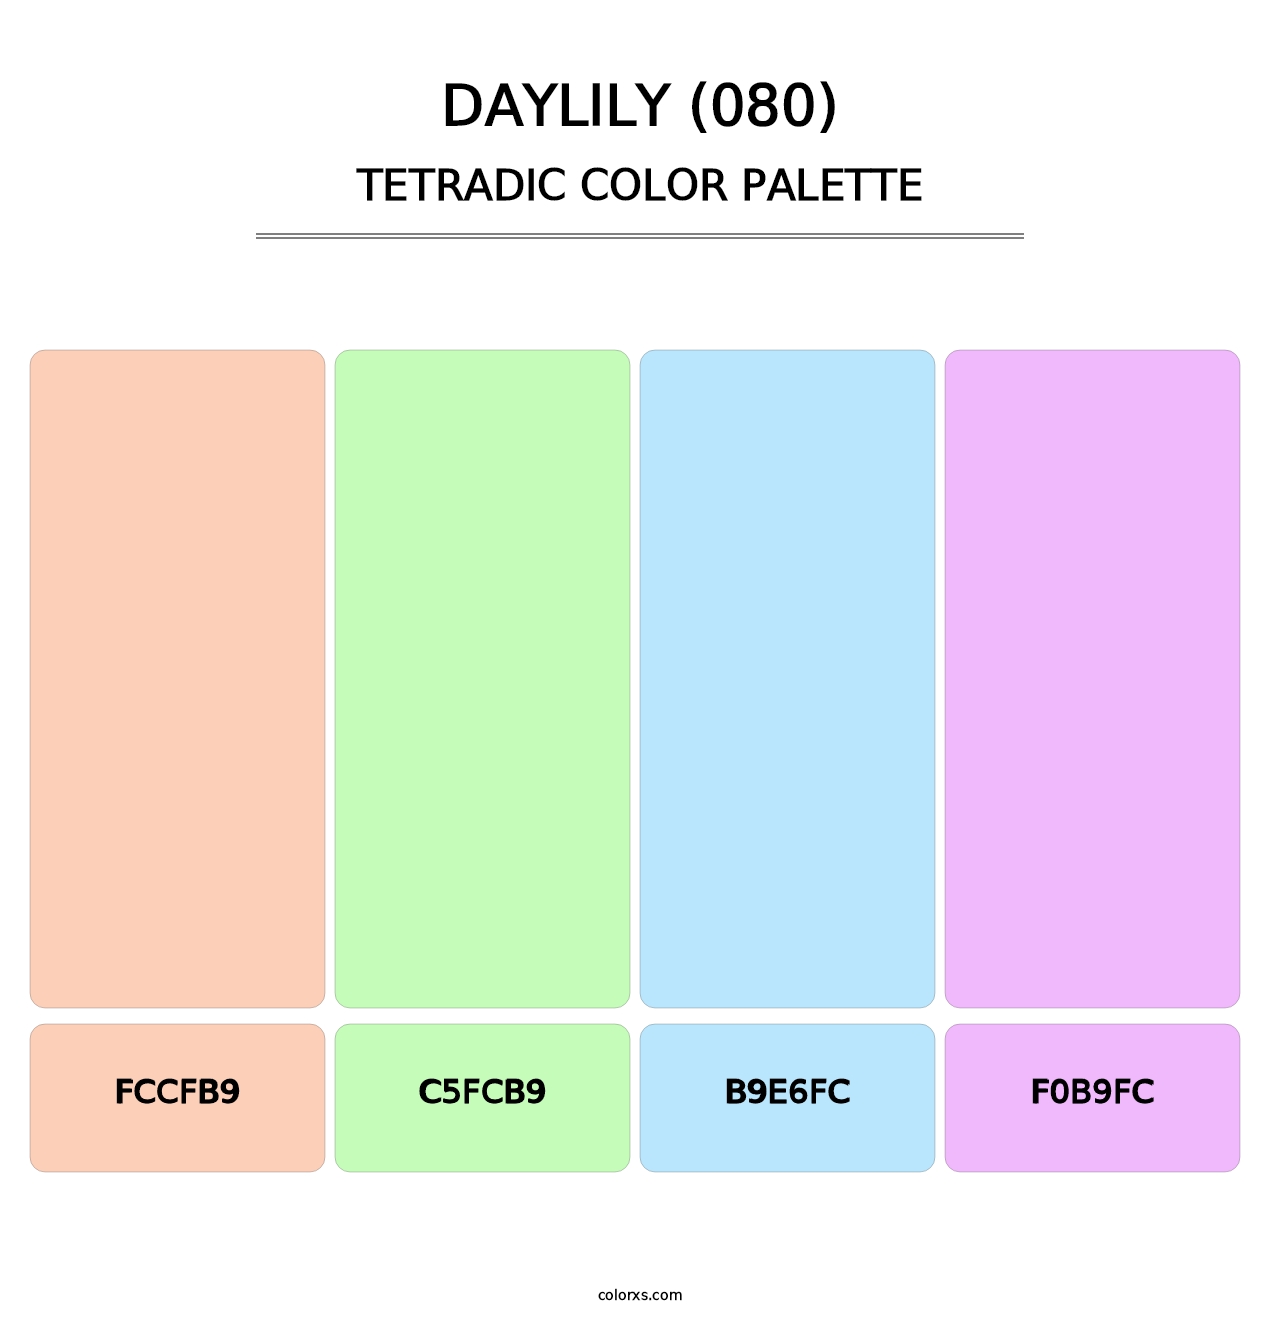 Daylily (080) - Tetradic Color Palette